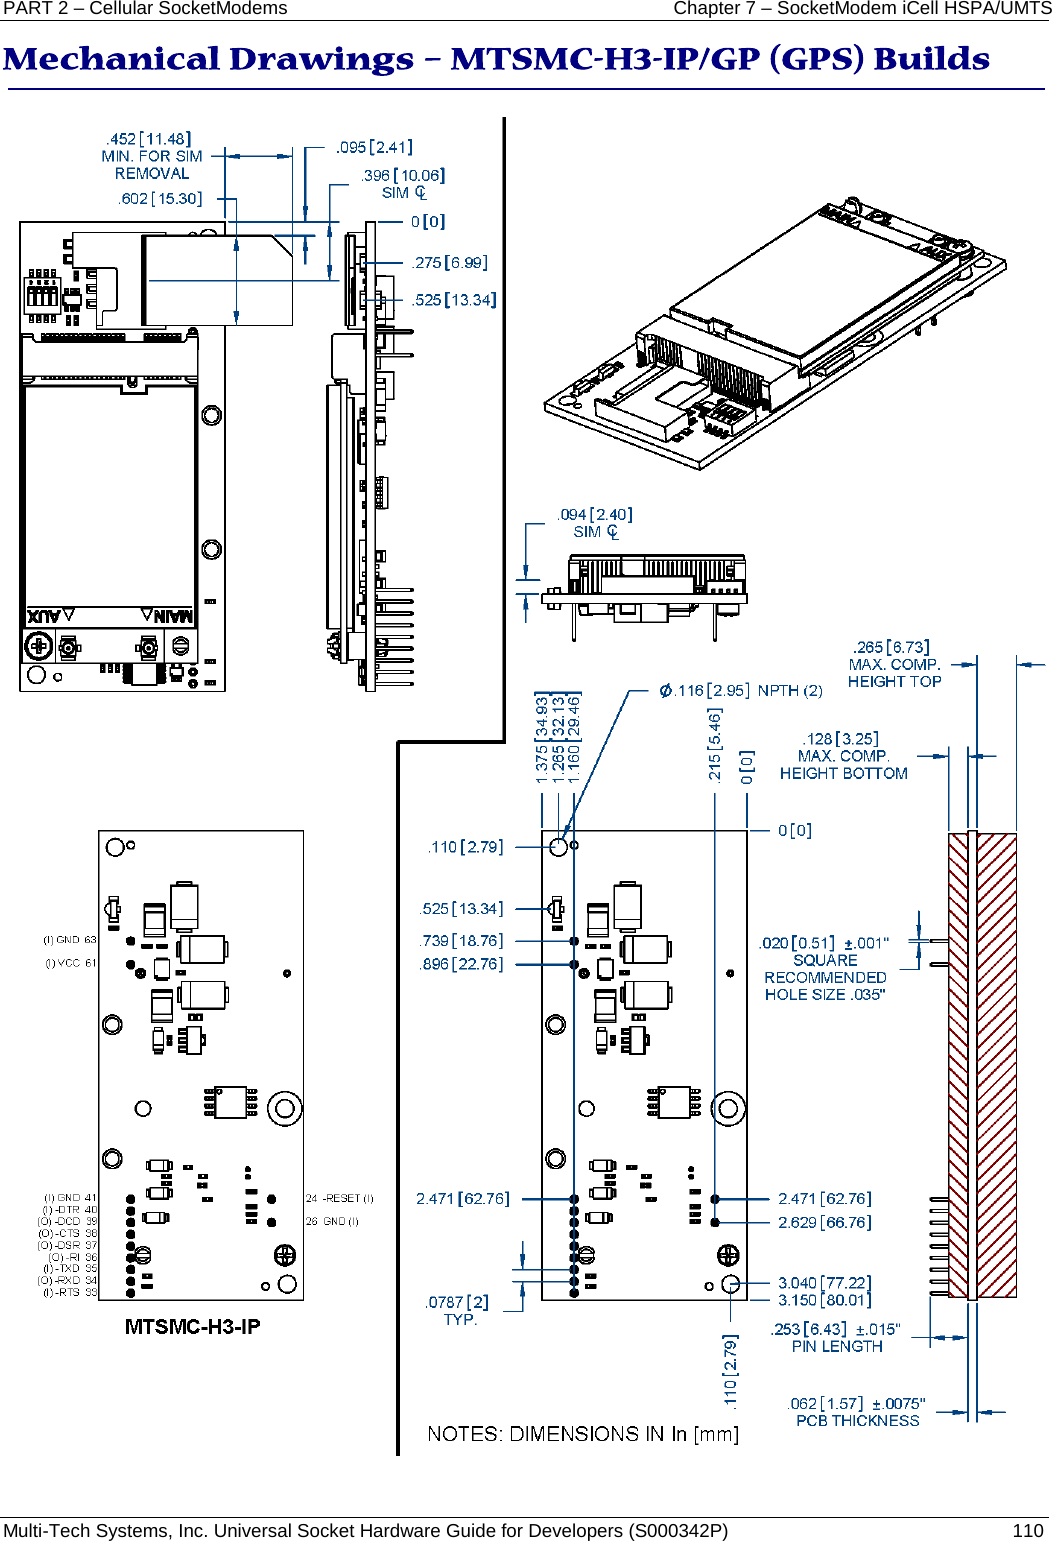 PART 2 – Cellular SocketModems Chapter 7 – SocketModem iCell HSPA/UMTS Multi-Tech Systems, Inc. Universal Socket Hardware Guide for Developers (S000342P)  110  Mechanical Drawings – MTSMC-H3-IP/GP (GPS) Builds    